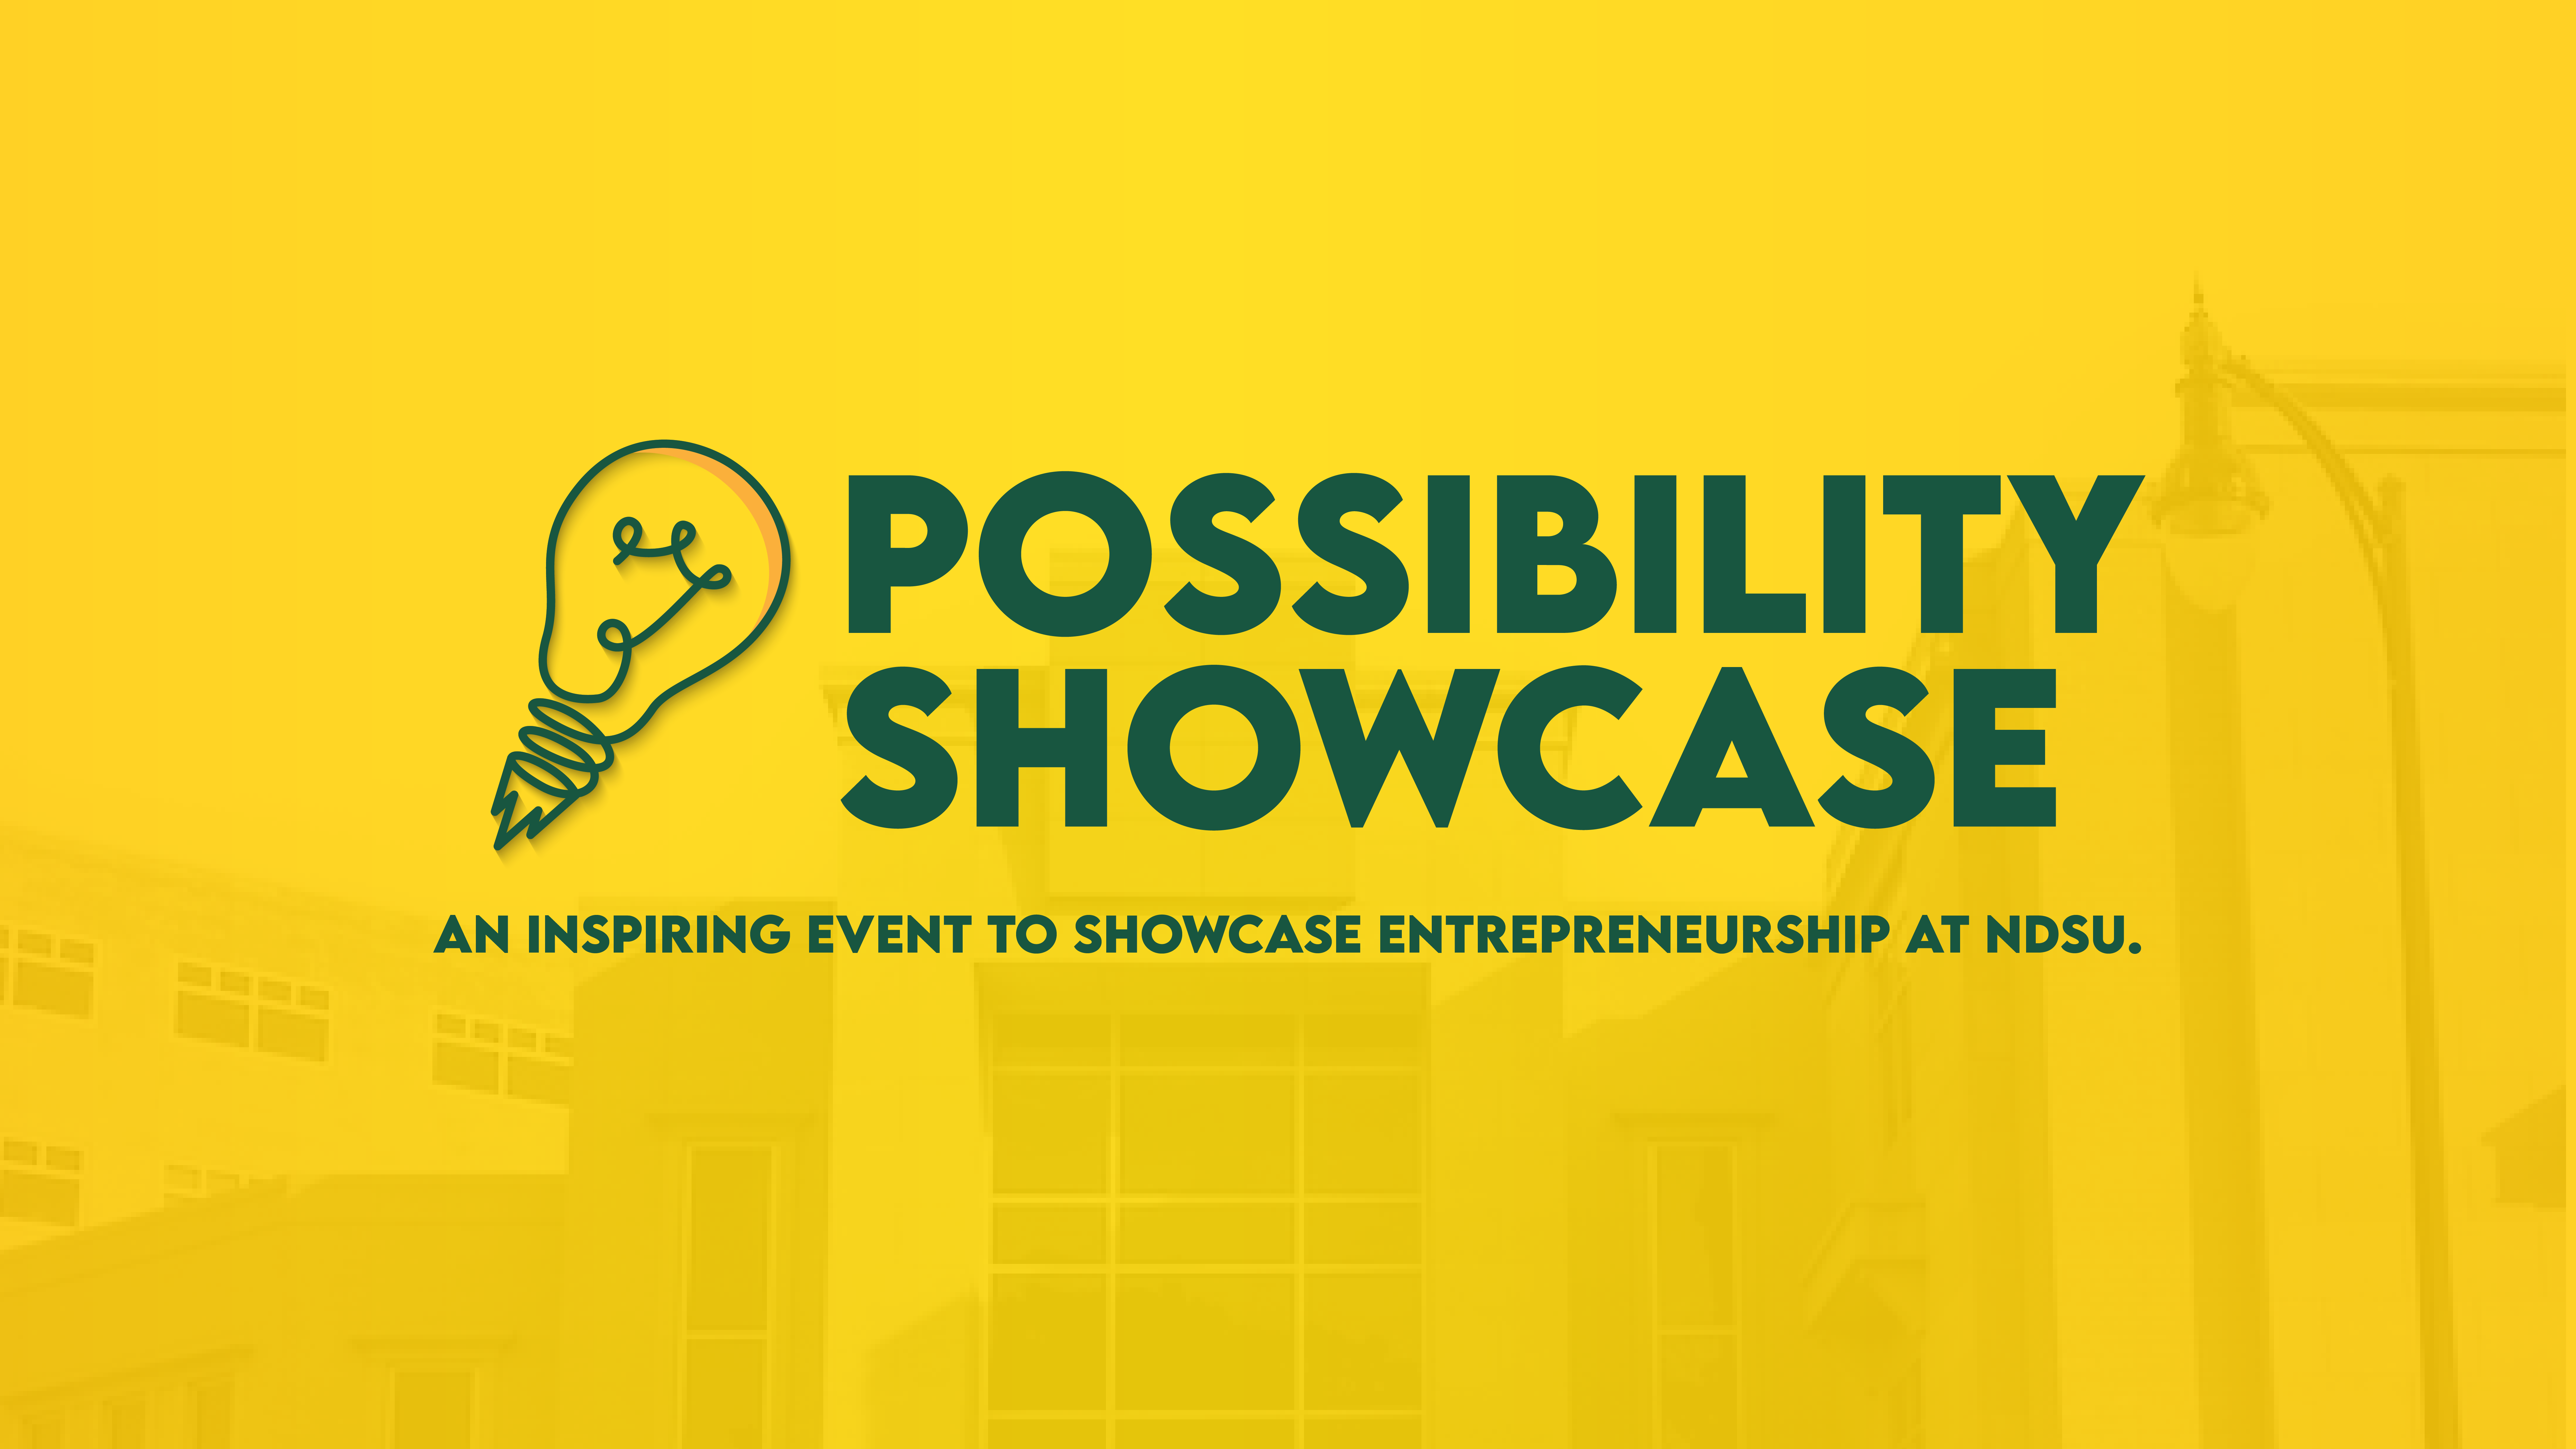 Entrepreneurship to Be Featured at NDSU’s Possibility Showcase Event